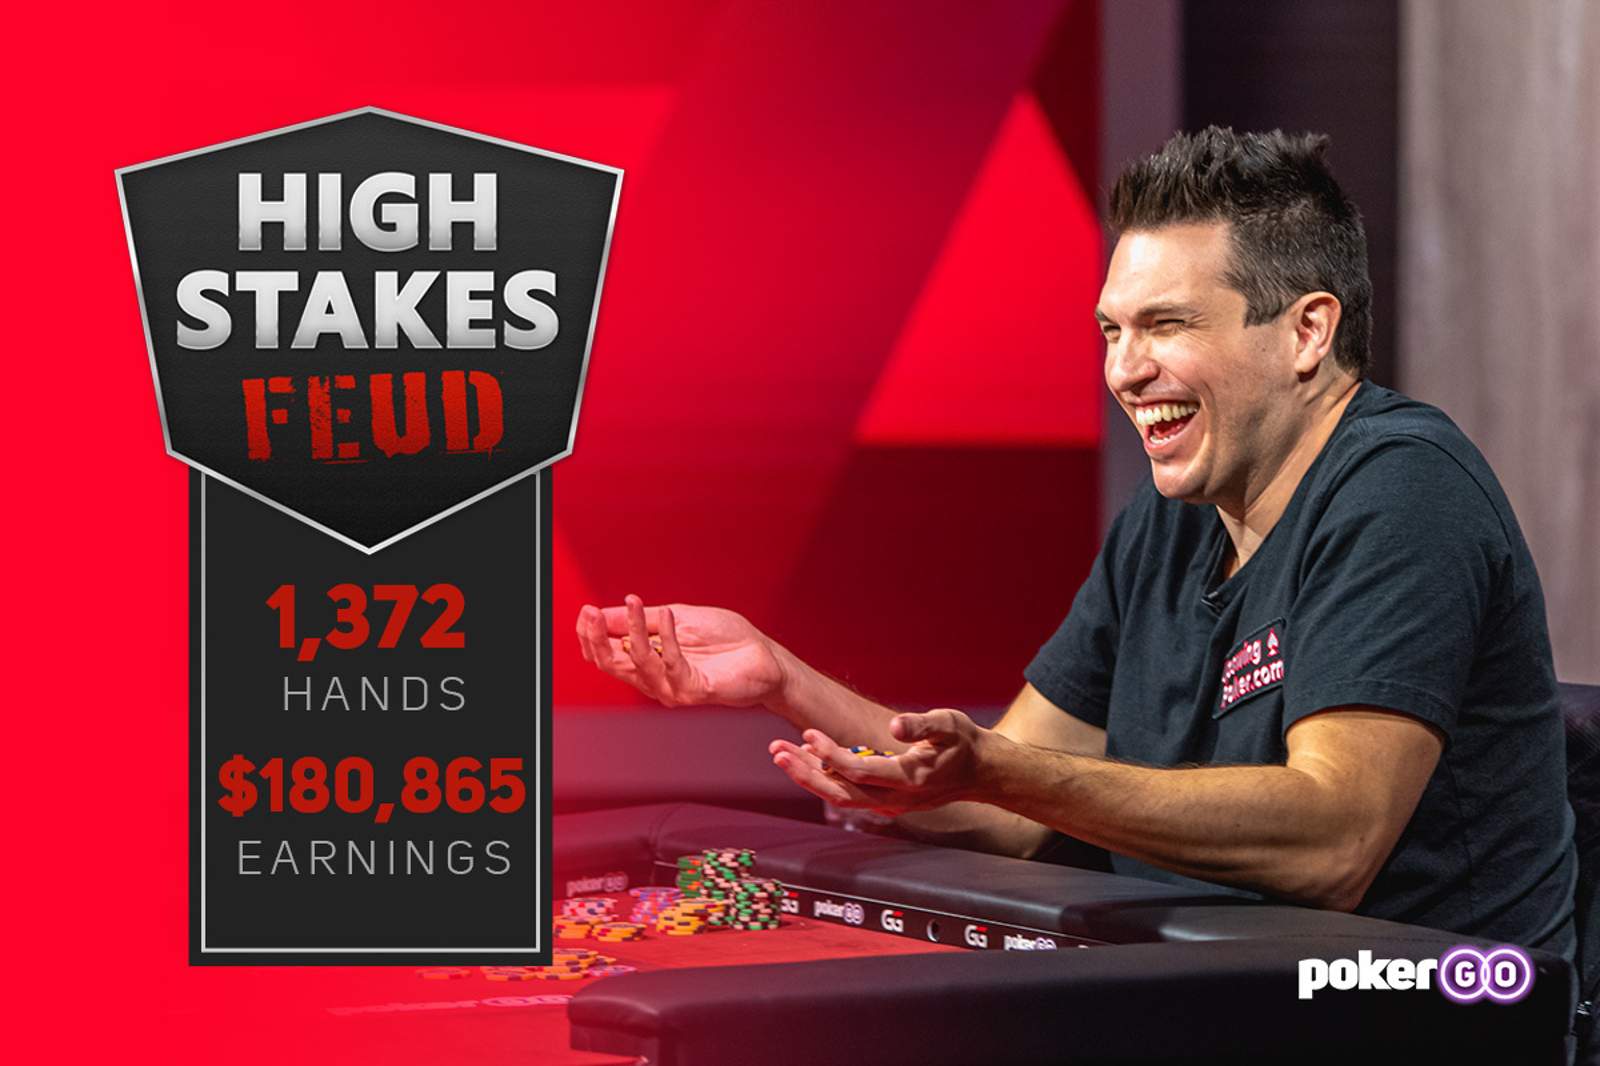 Doug Polk Leads Daniel Negreanu by $180,865 After 1,372 Hands in High Stakes Feud